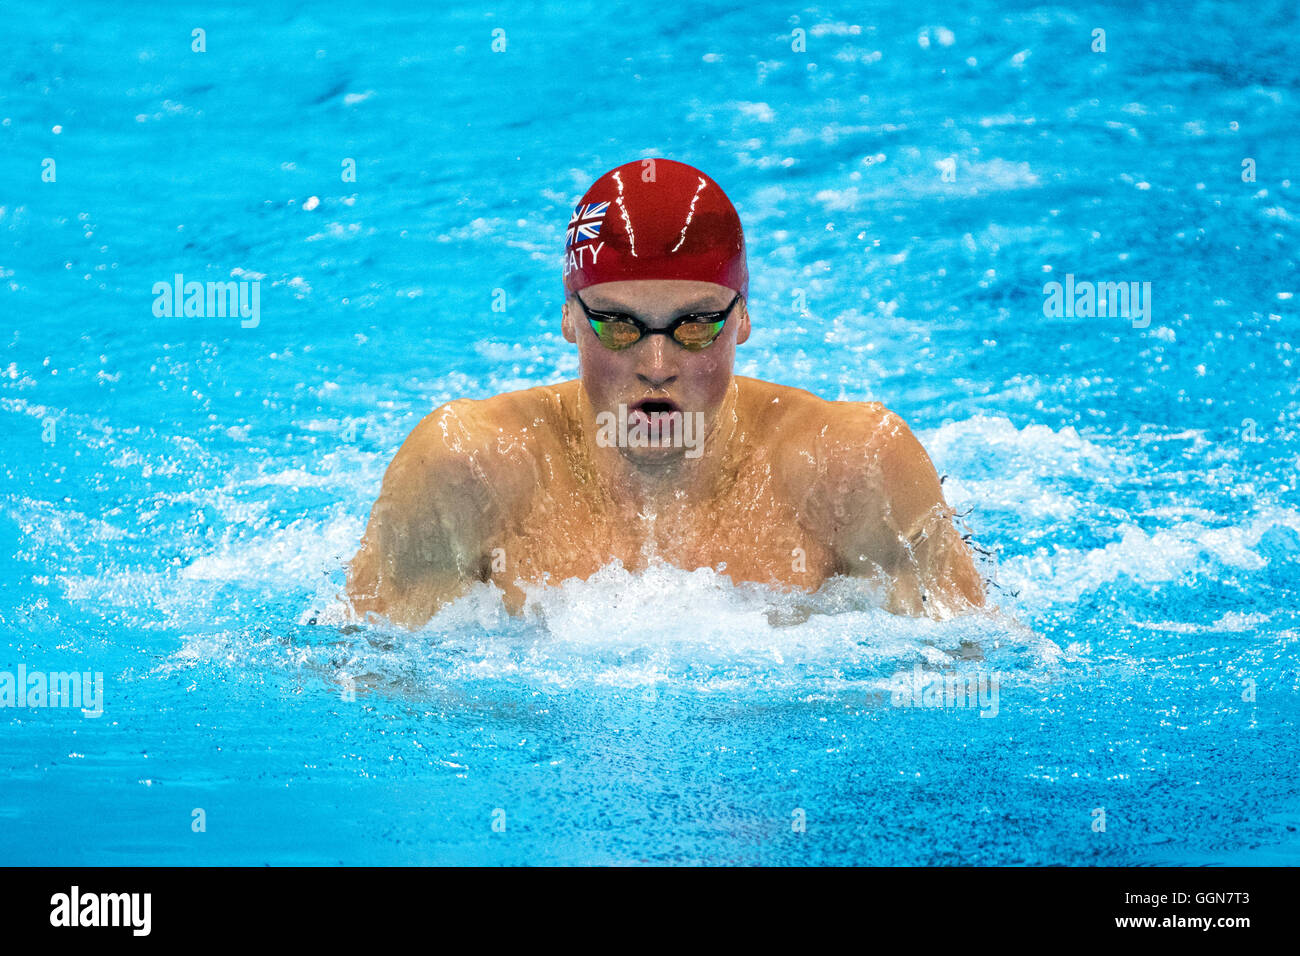 Rio de Janeiro, Brazil. 6 August 2016. Adam Peaty (GRB) breaks the worlds record in the men's 100m Breaststroke during his preliminary heat at the 2016 Olympic Summer Games. Credit:  PCN Photography/Alamy Live News Stock Photo